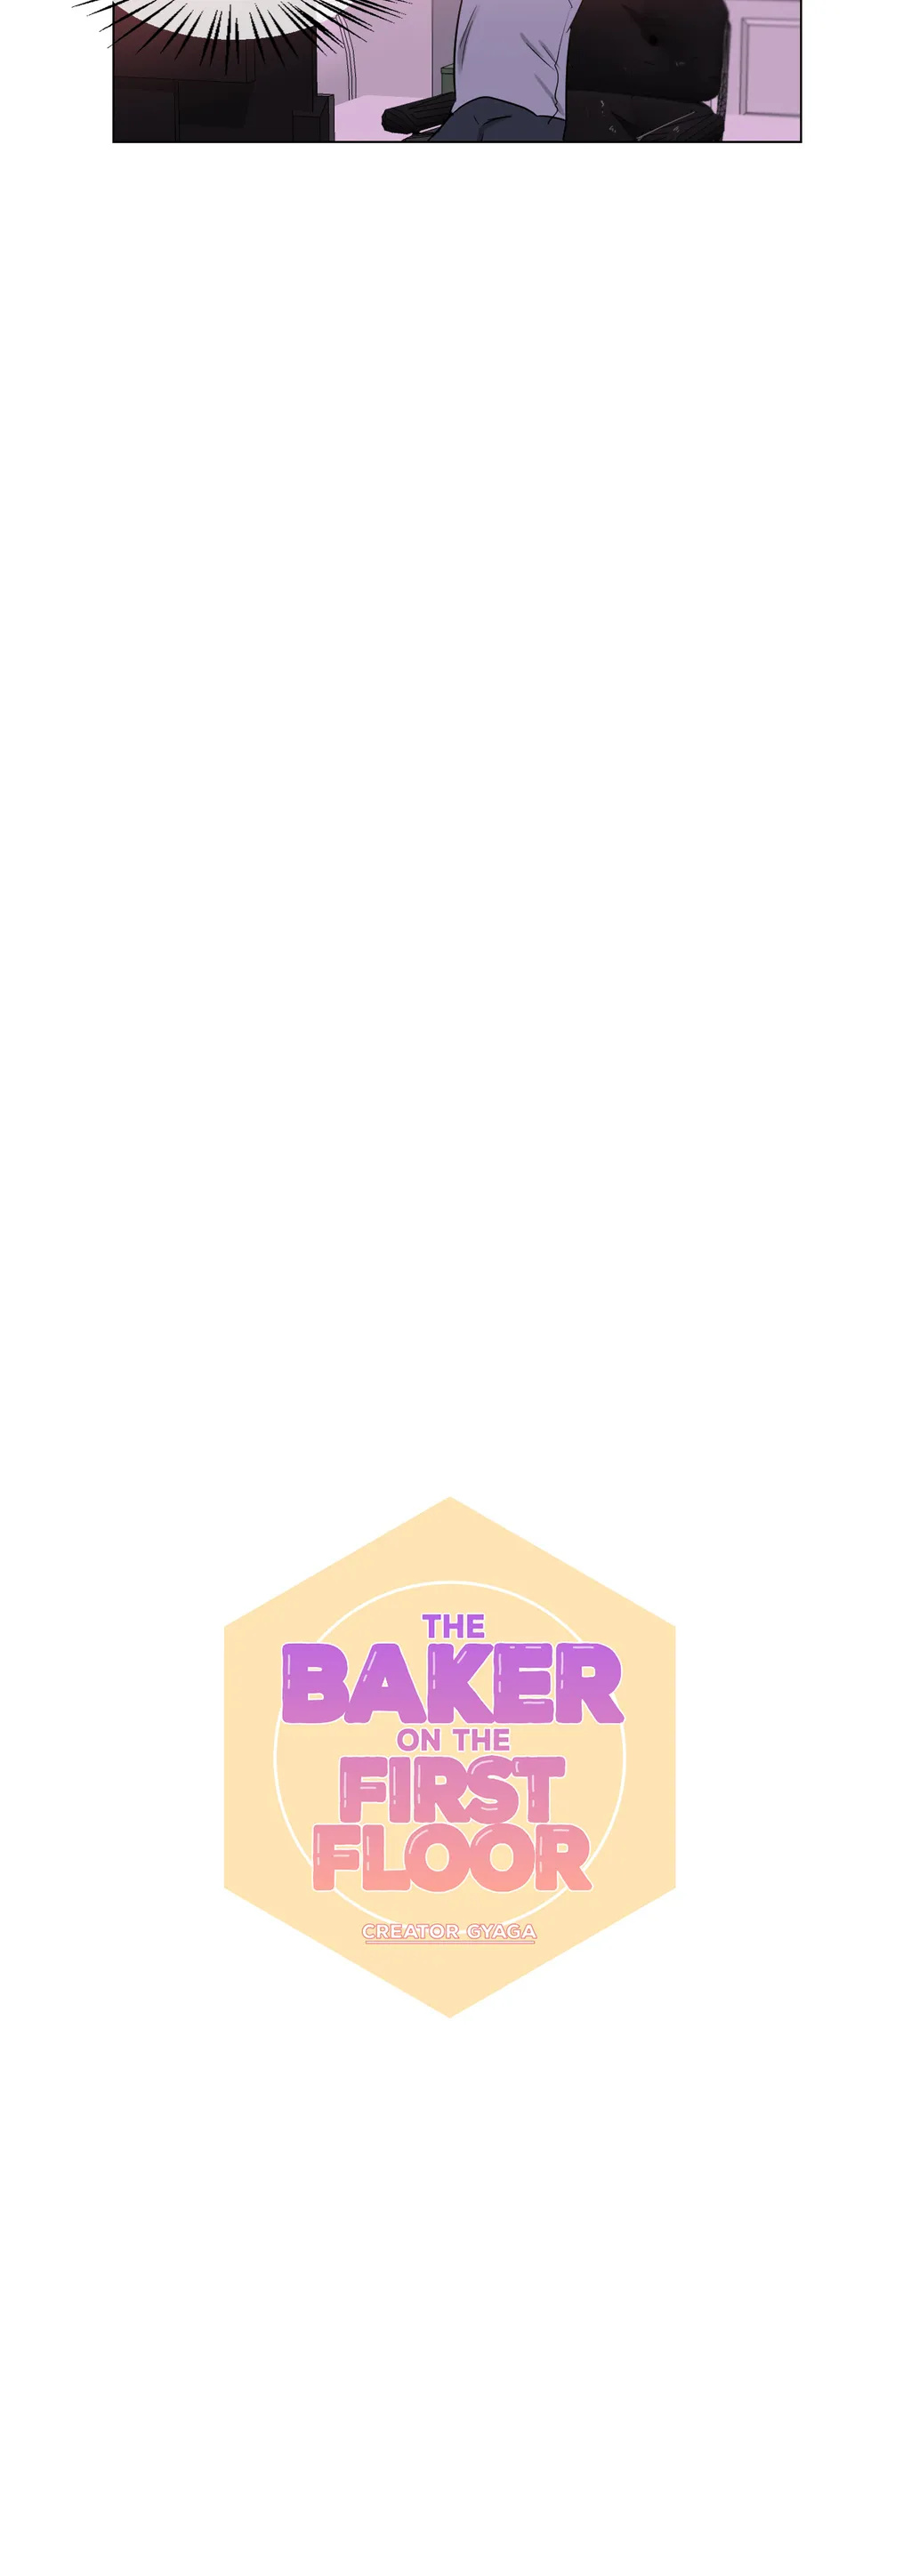 The Baker On The First Floor - Page 2